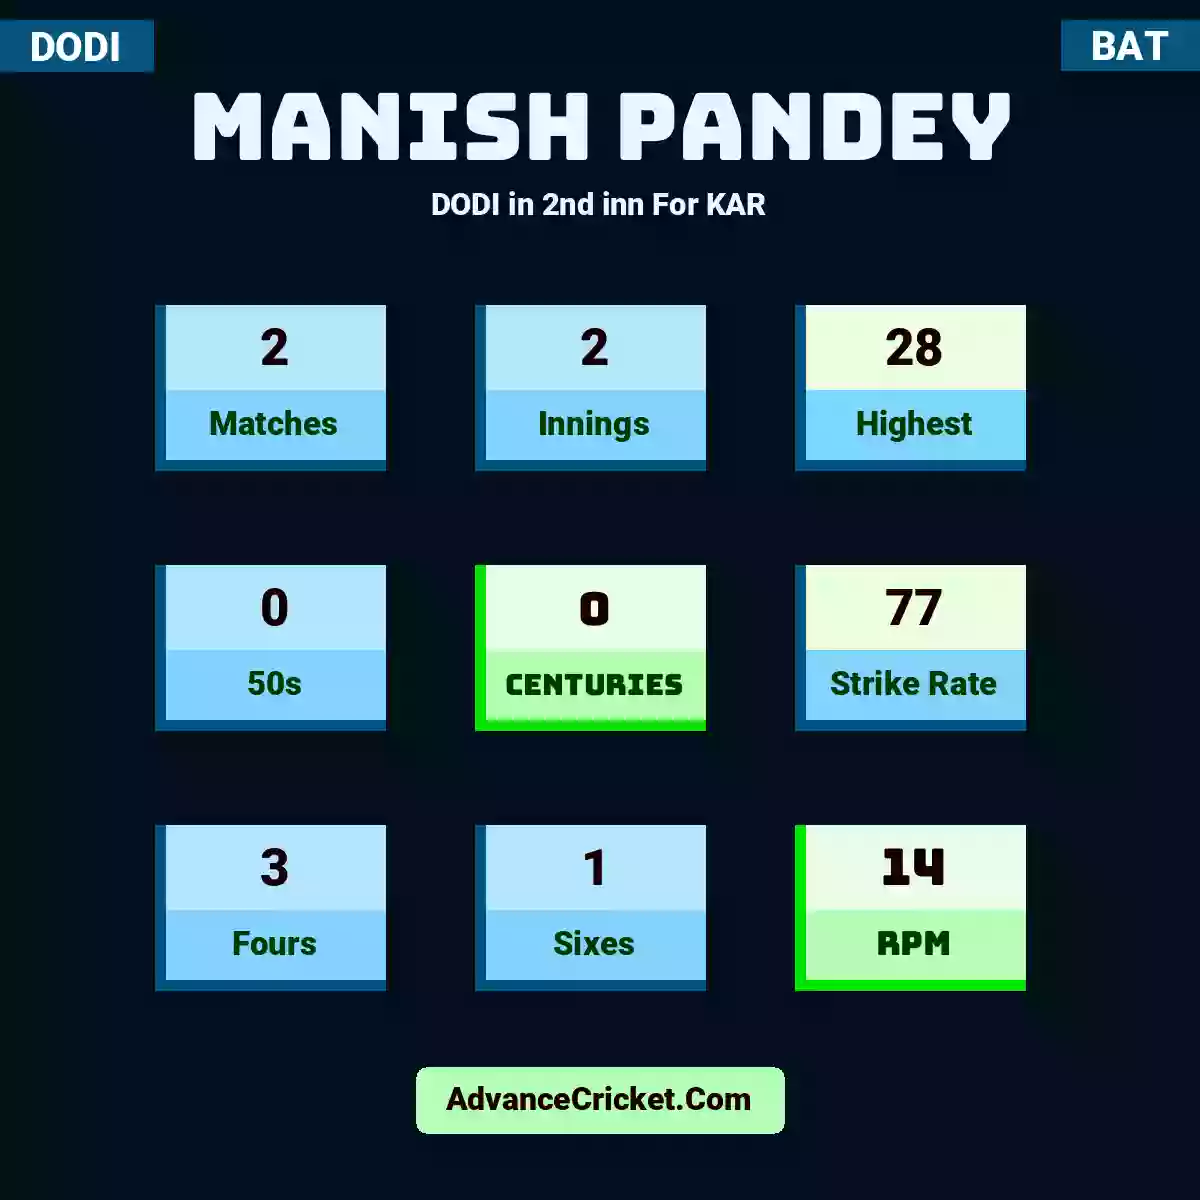 Manish Pandey DODI  in 2nd inn For KAR, Manish Pandey played 2 matches, scored 28 runs as highest, 0 half-centuries, and 0 centuries, with a strike rate of 77. M.Pandey hit 3 fours and 1 sixes, with an RPM of 14.